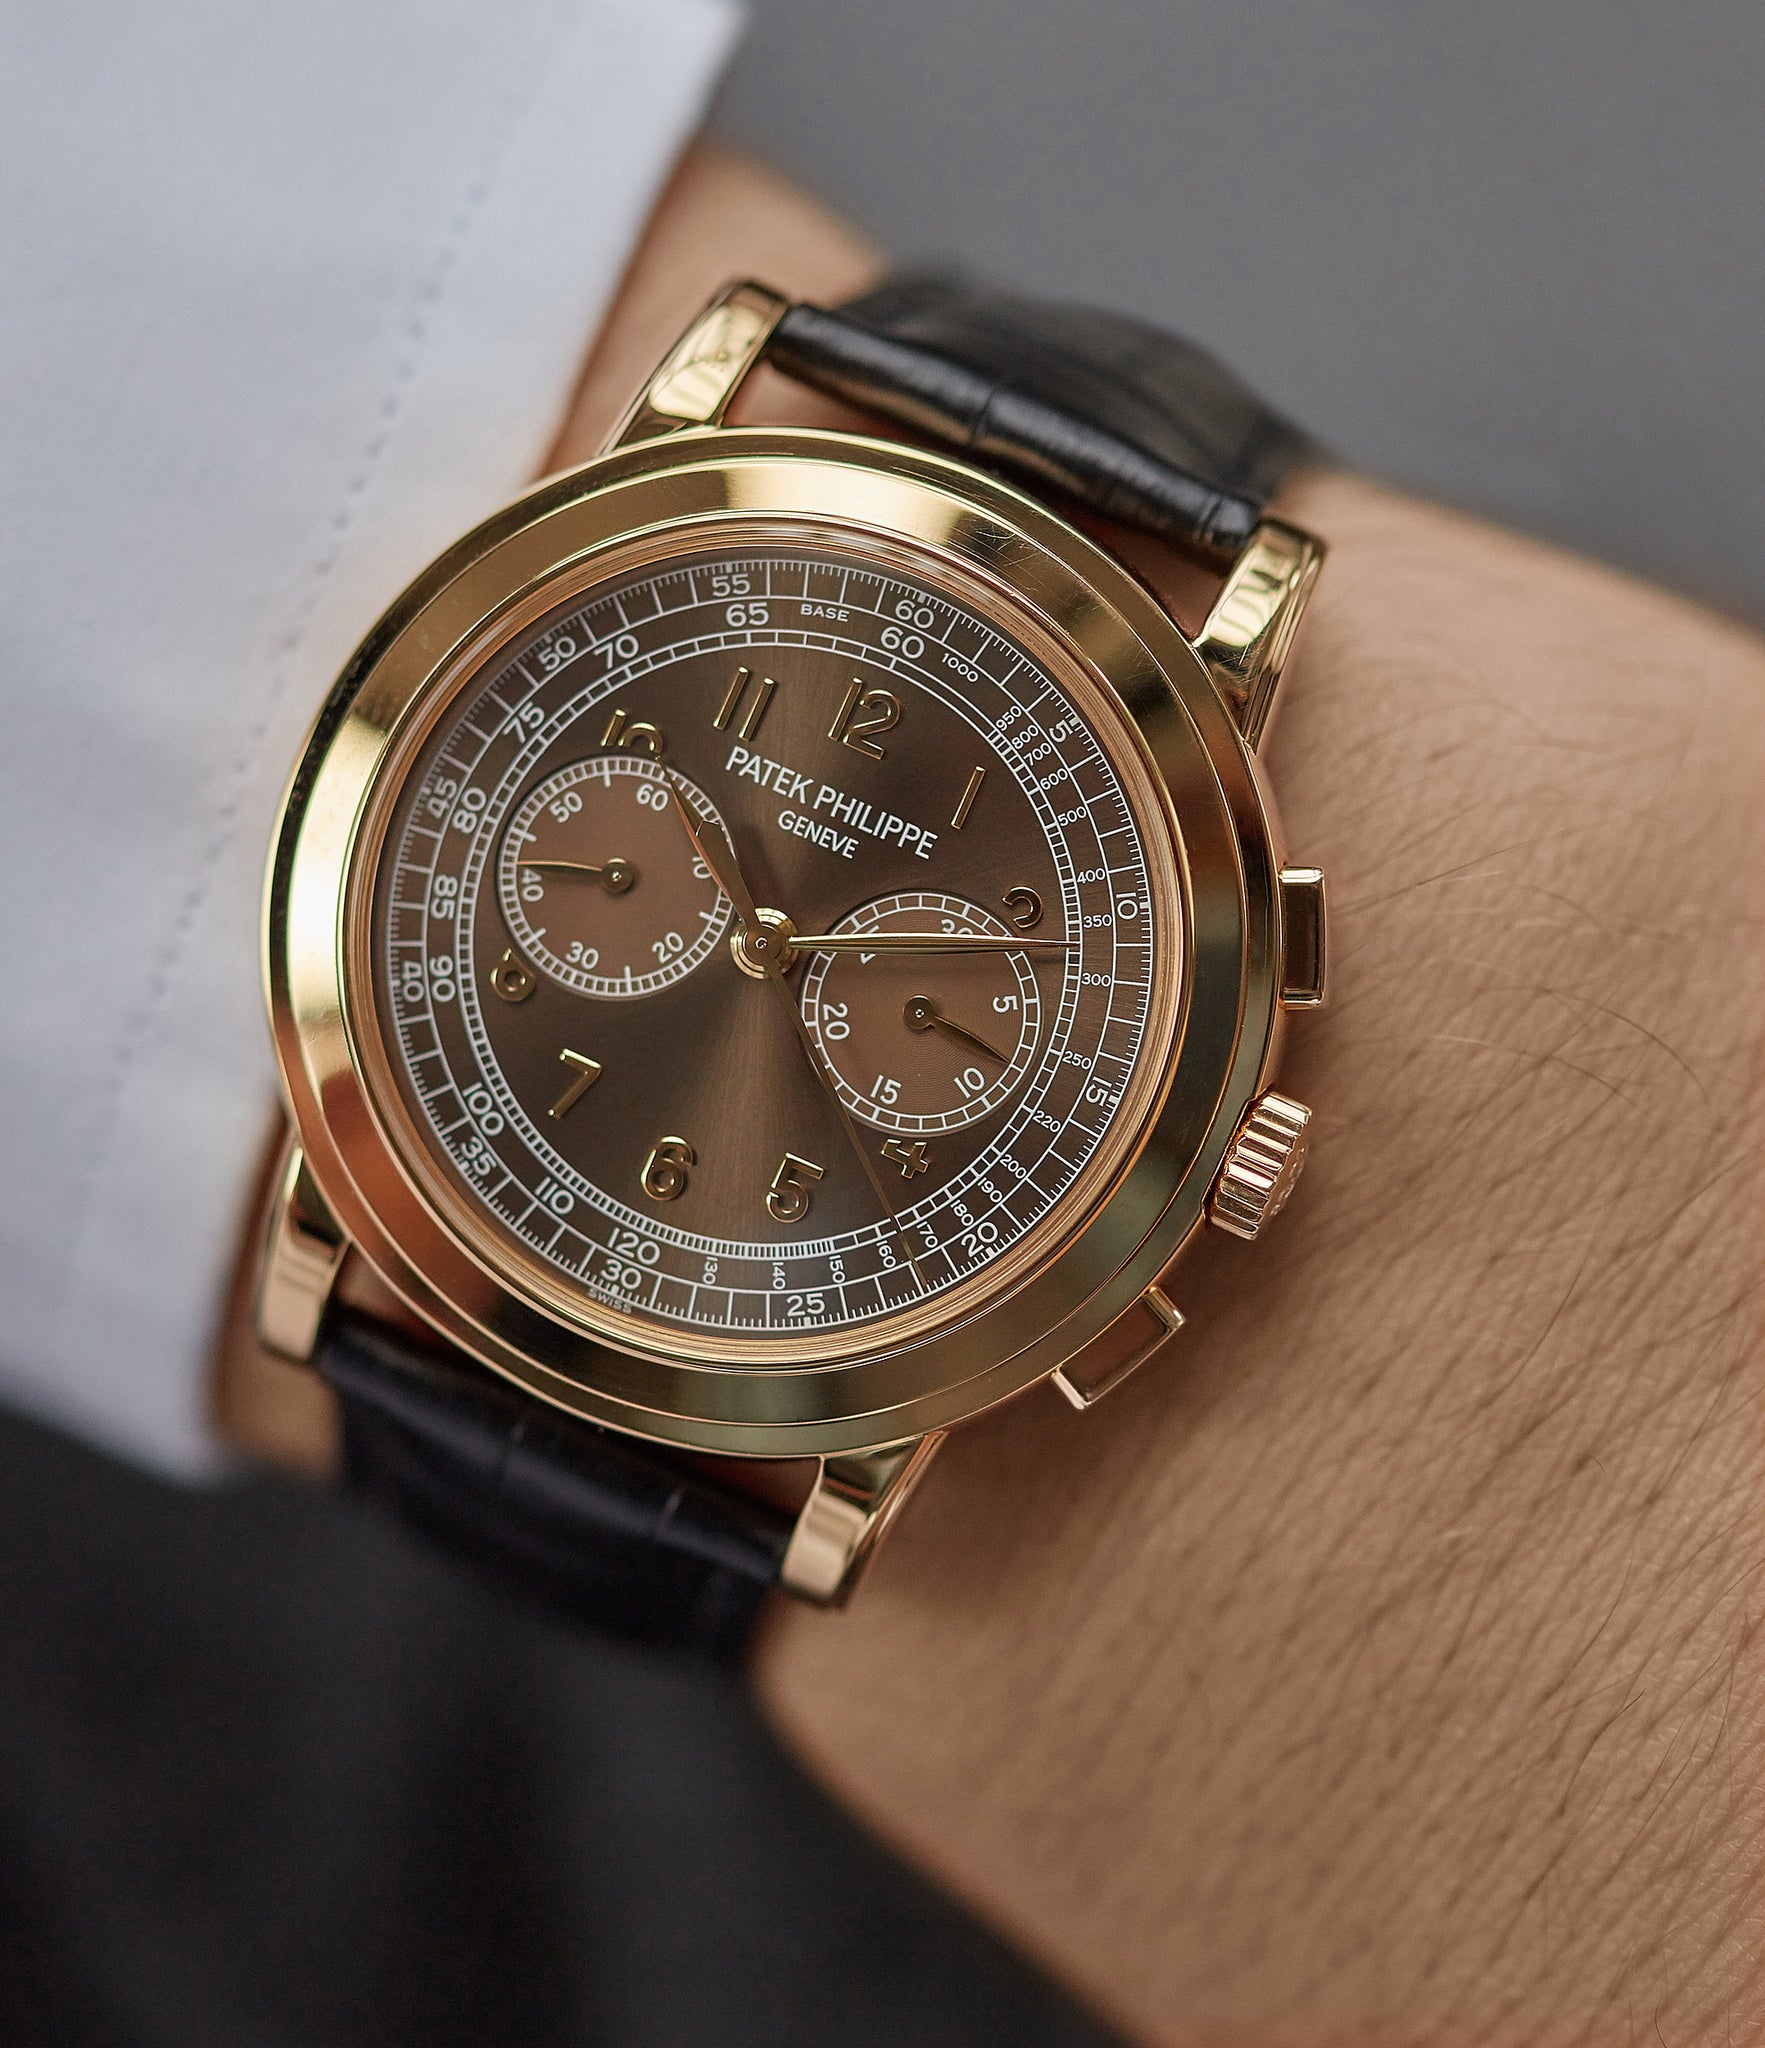 on the wrist Patek Philippe 5070J-012 Saatchi Edition Chronograph yellow gold watch for sale online at A Collected Man London UK specialist of rare watches